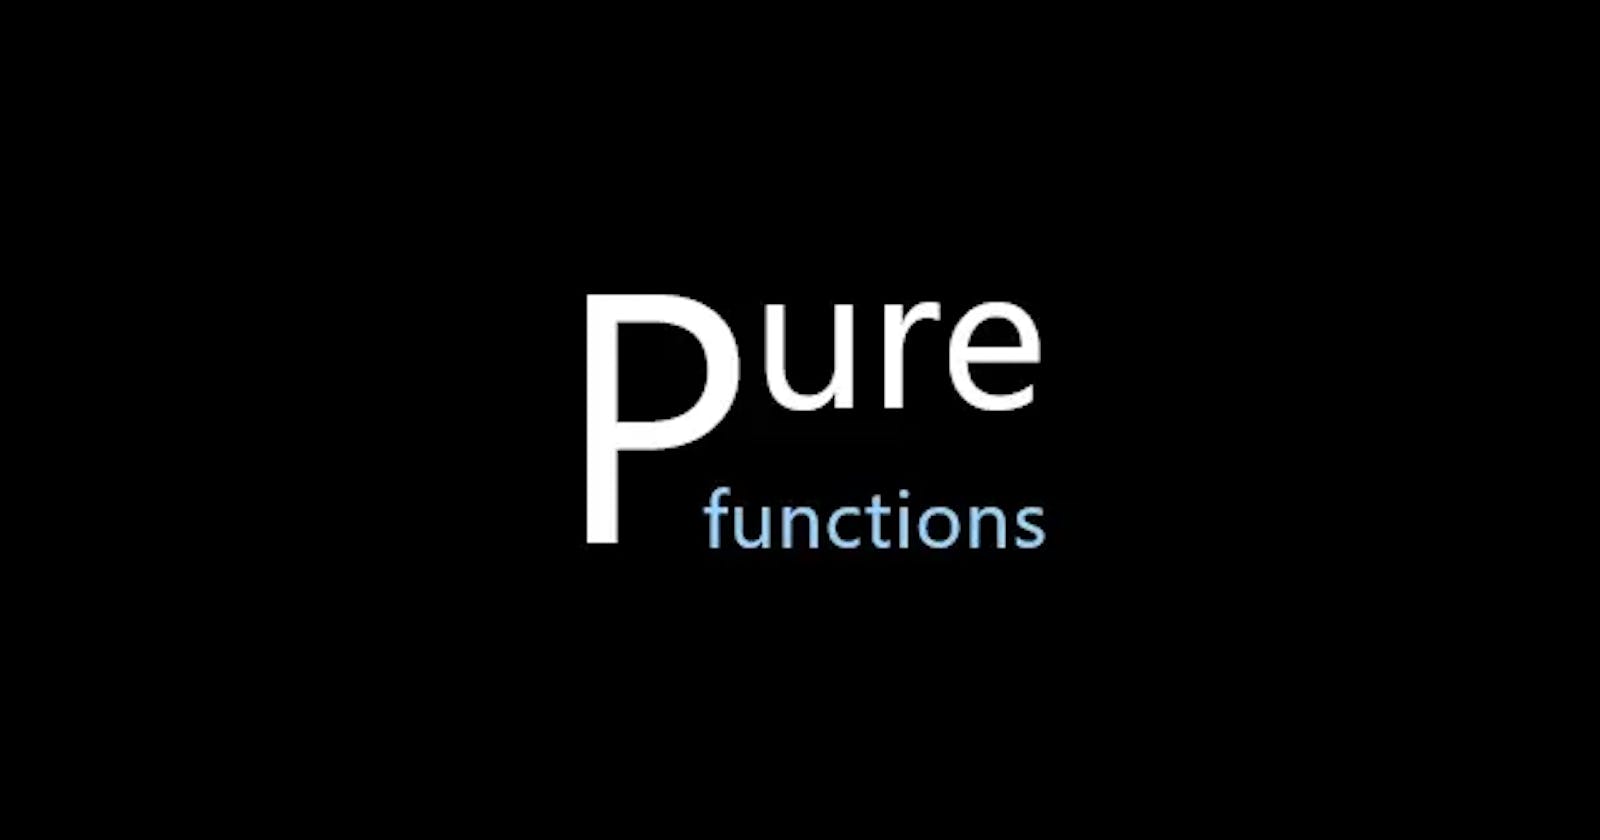 Functions -am I pure?